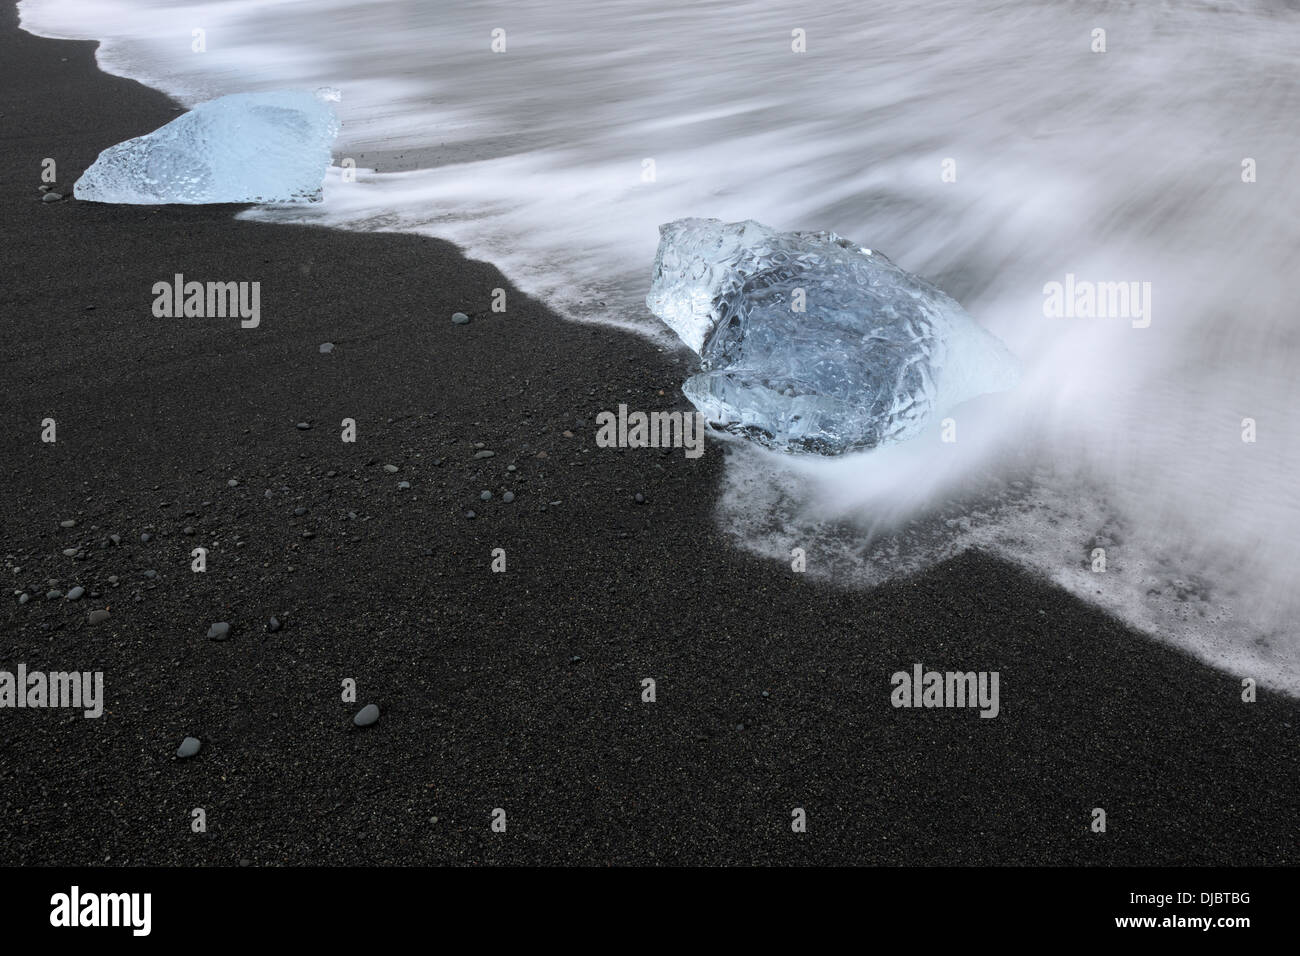 Ice block on a beach with lava stones and water floating over. Stock Photo